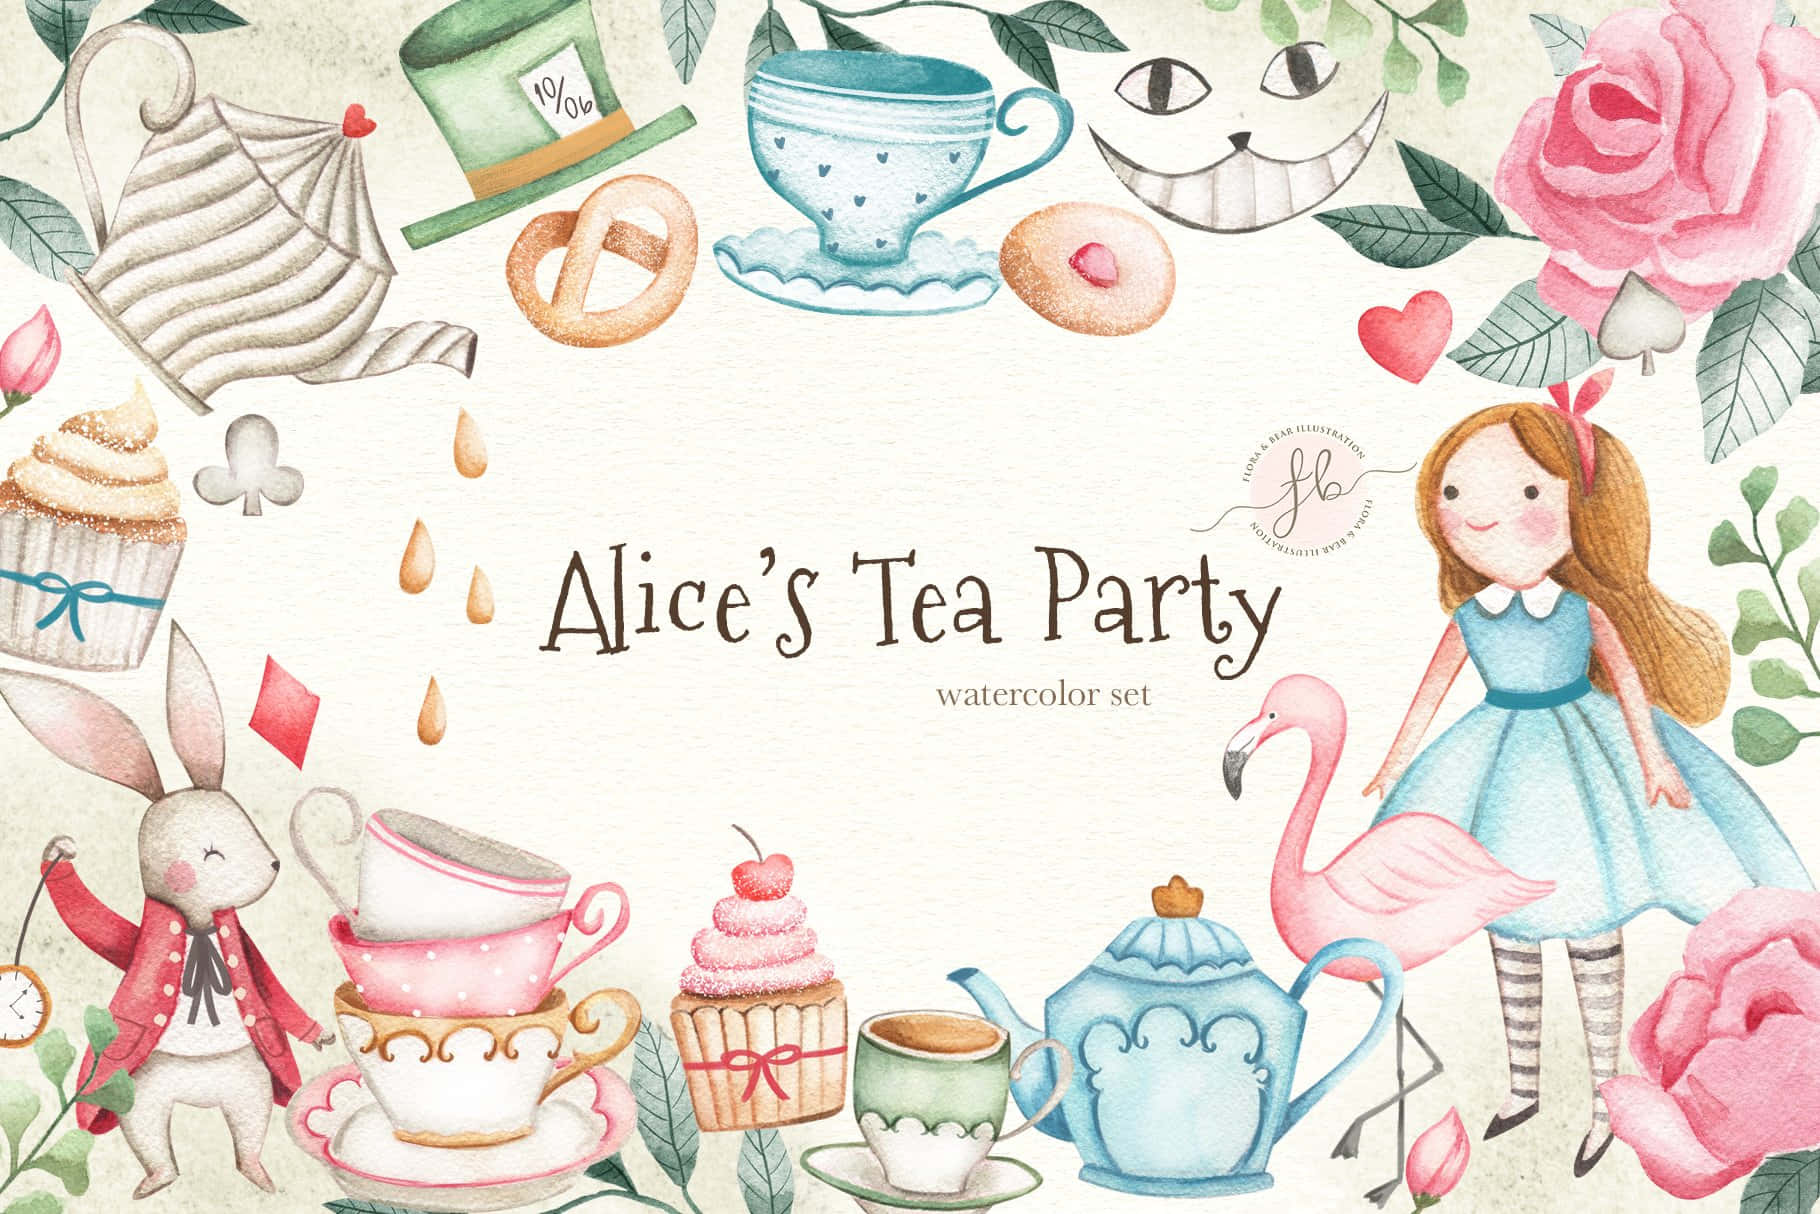 Spend a Lovely Afternoon with Friends at a Tea Party